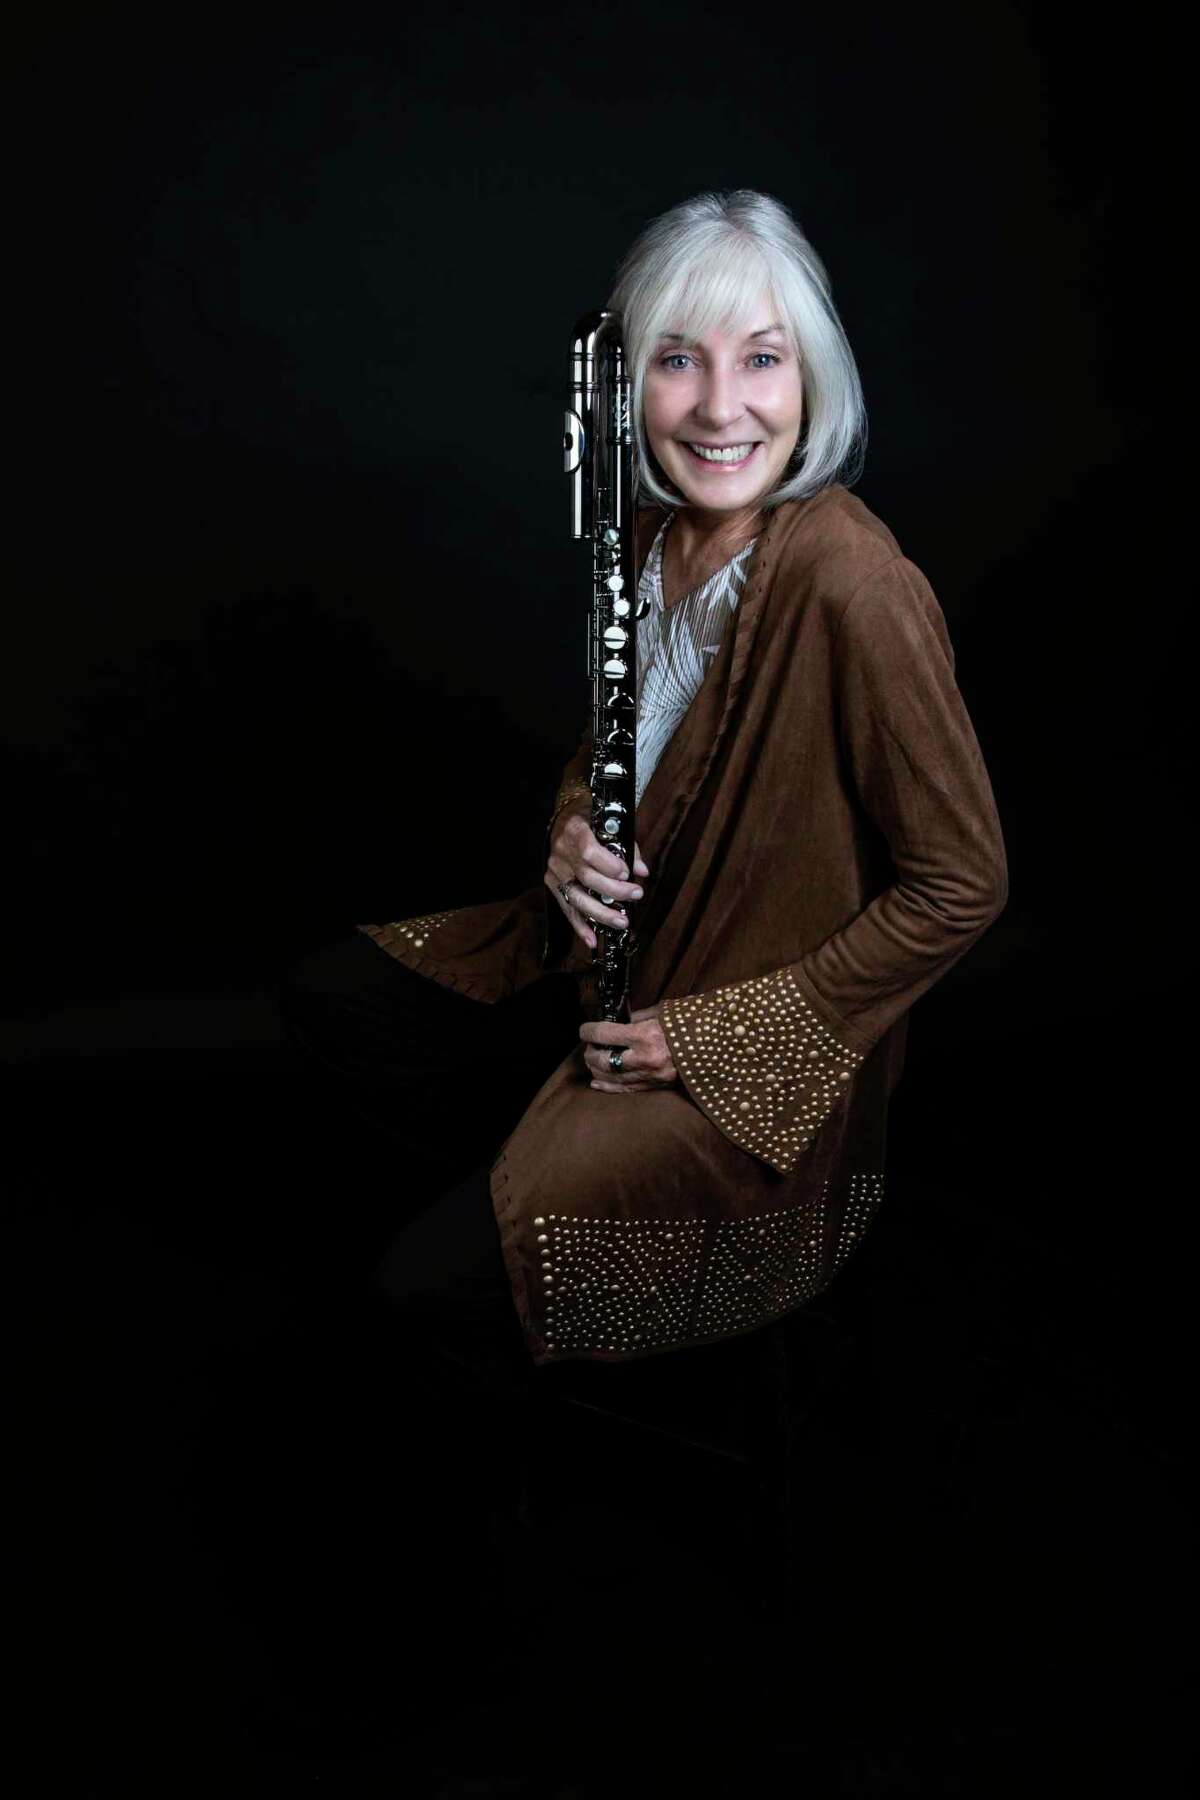 Jazz flutist Ali Ryerson and her jazz quartet are performing for the Merryall Center's gala, set for July 16.